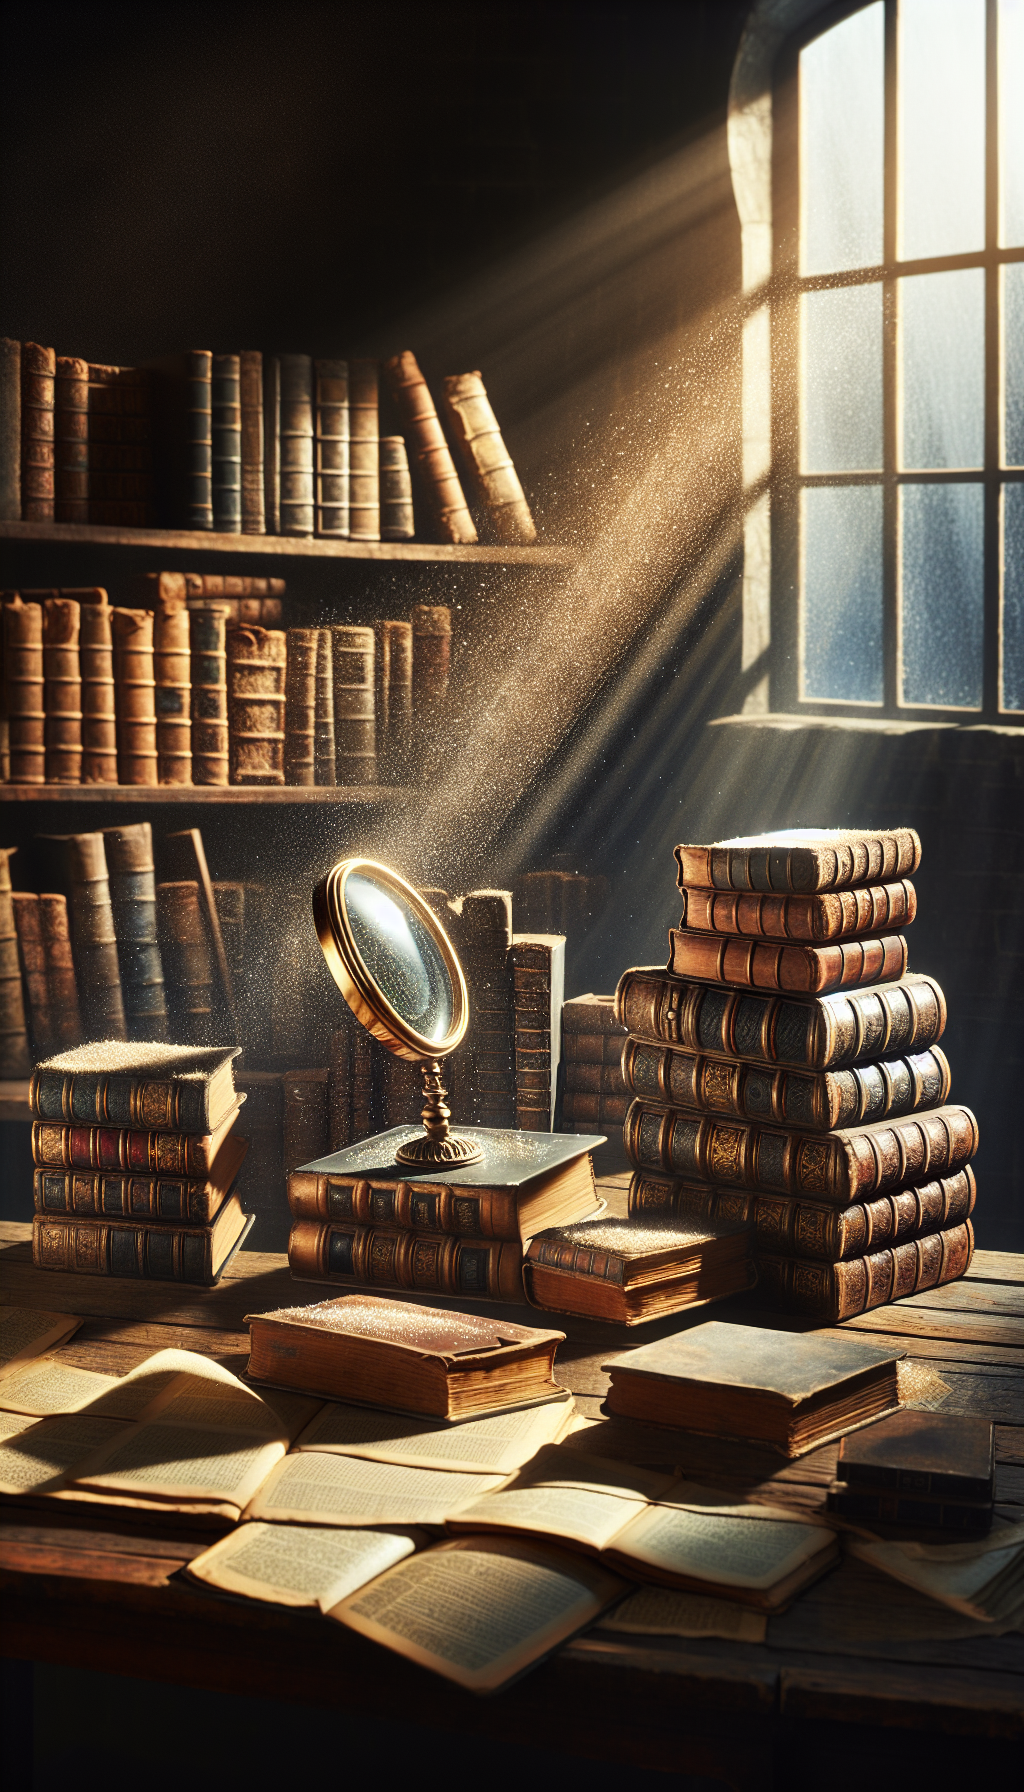 An antiquated desk with a magnifying glass hovering over a pile of ancient, leather-bound books, dust particles dancing in a beam of light. Beneath the glass, key factors like 'rarity,' 'condition,' and 'demand' glow as golden script across the tomes, symbolizing their value. Each book wears a price tag marked with these indicators, intertwining charm and appraisal.